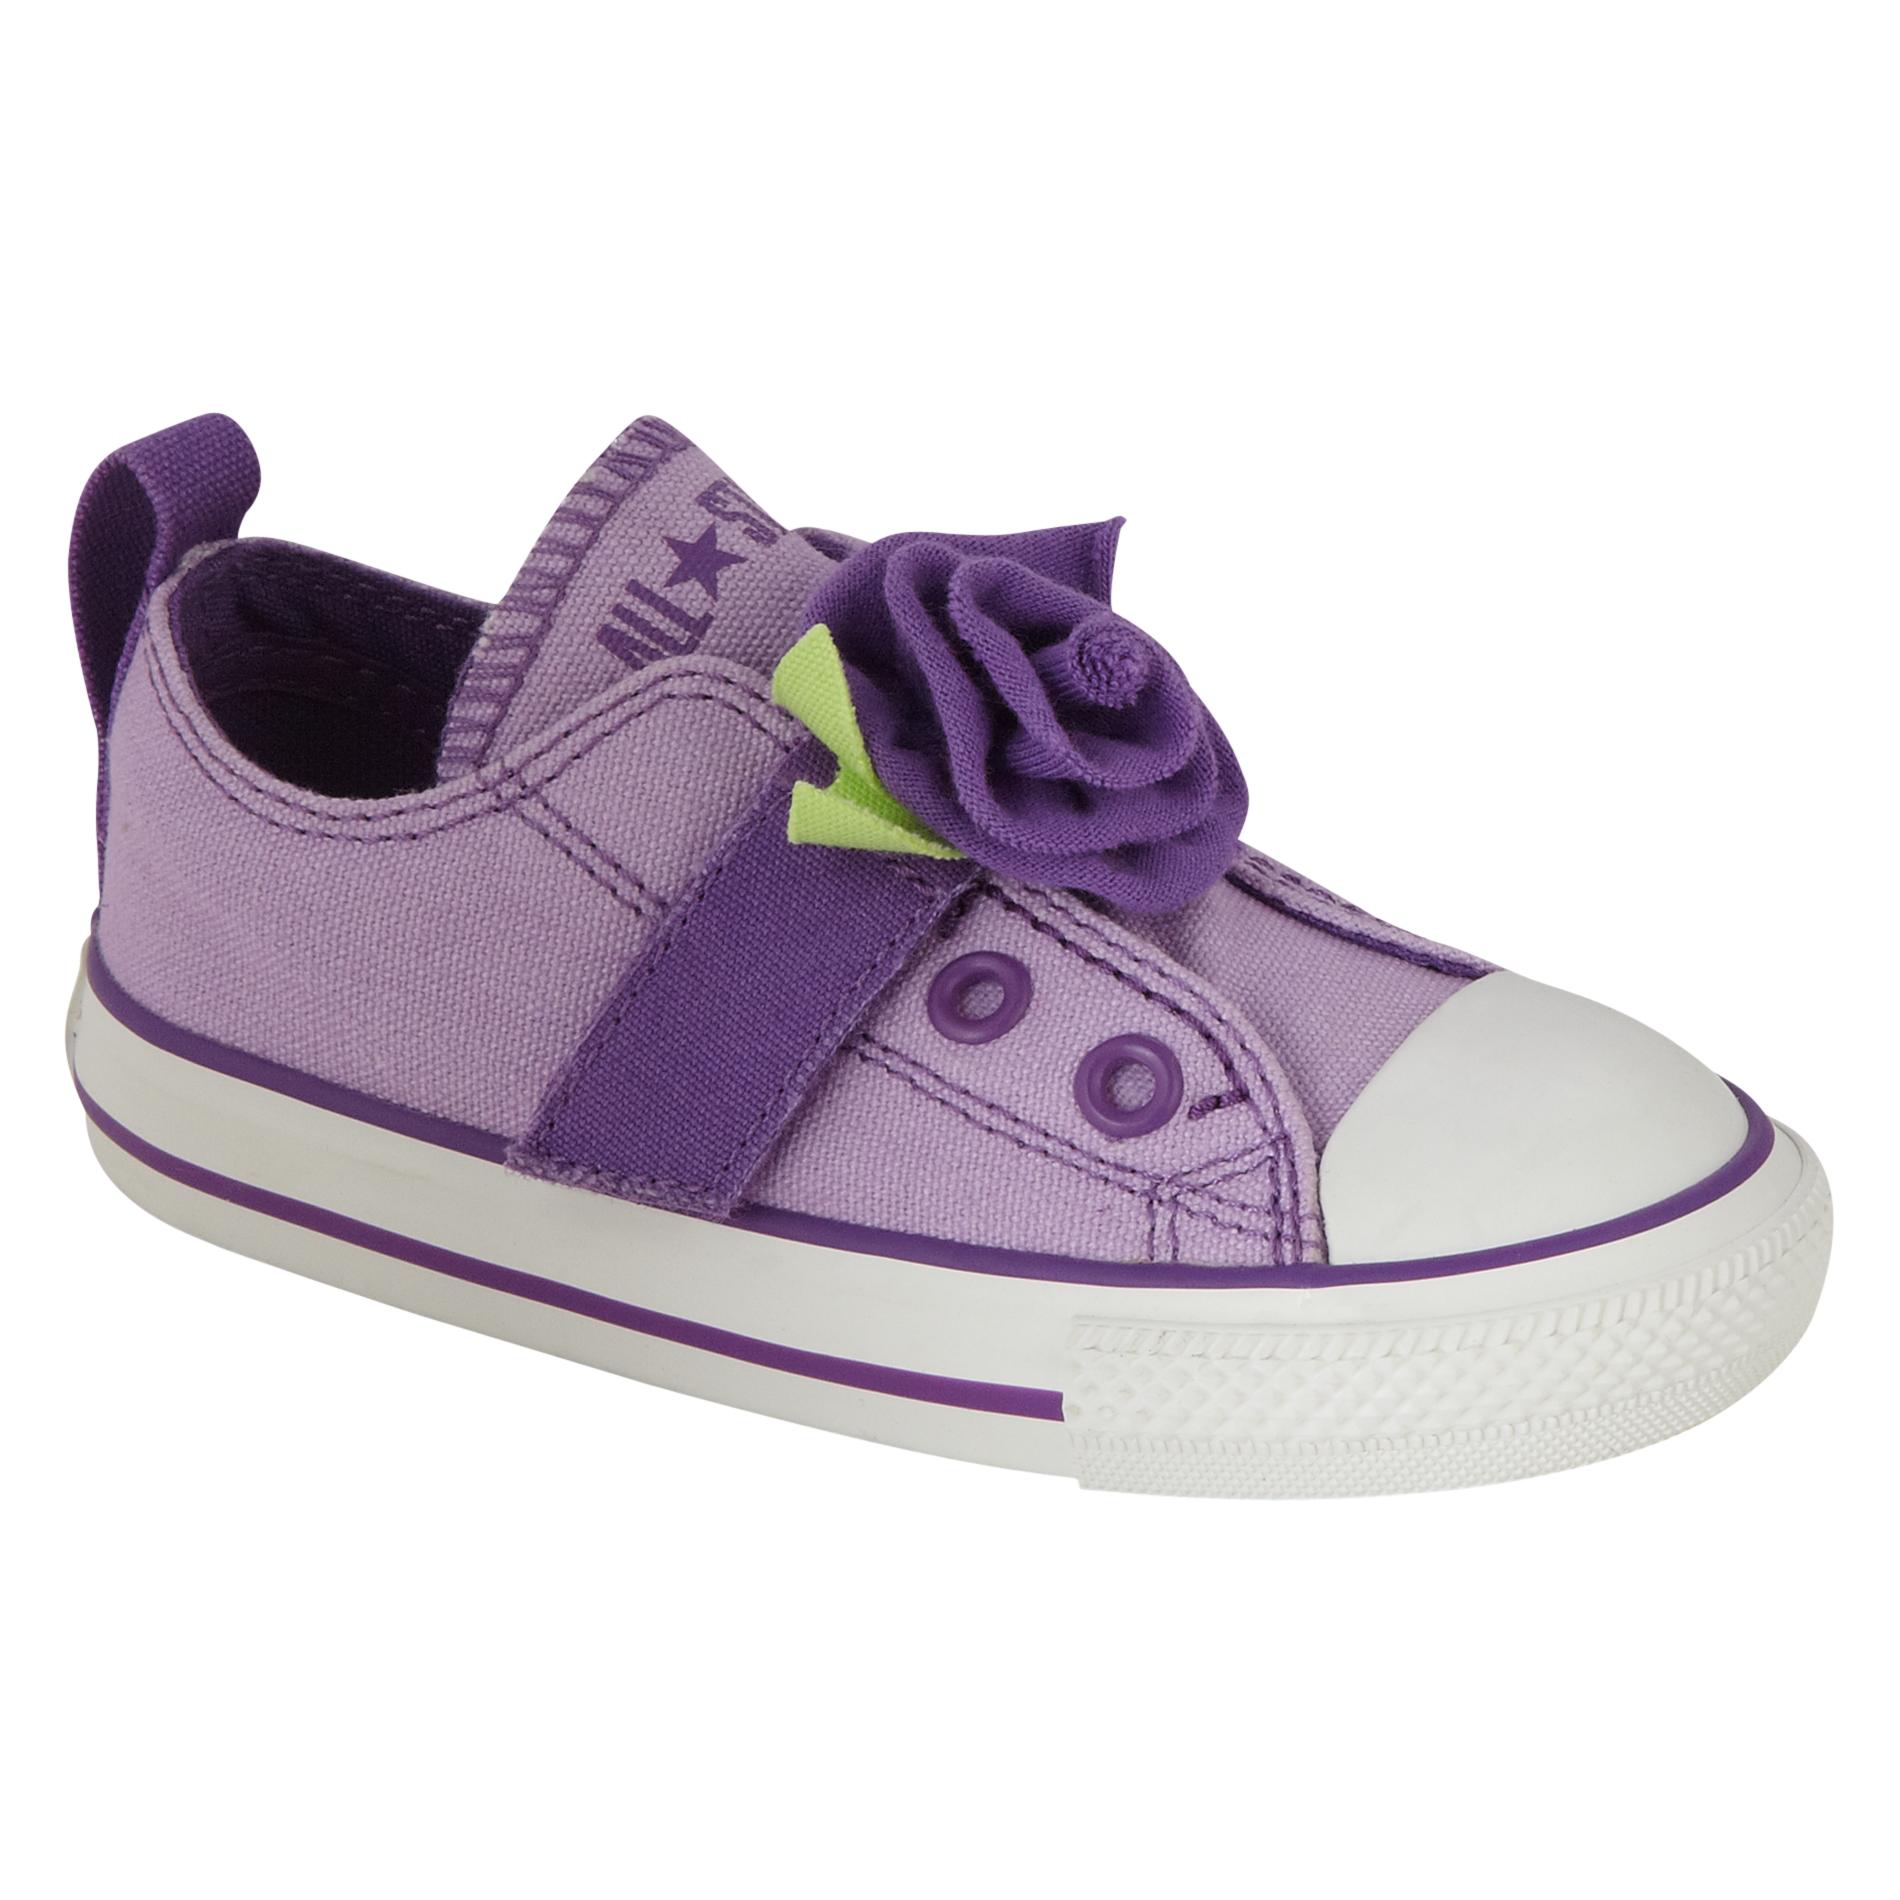 toddler girls converse shoes